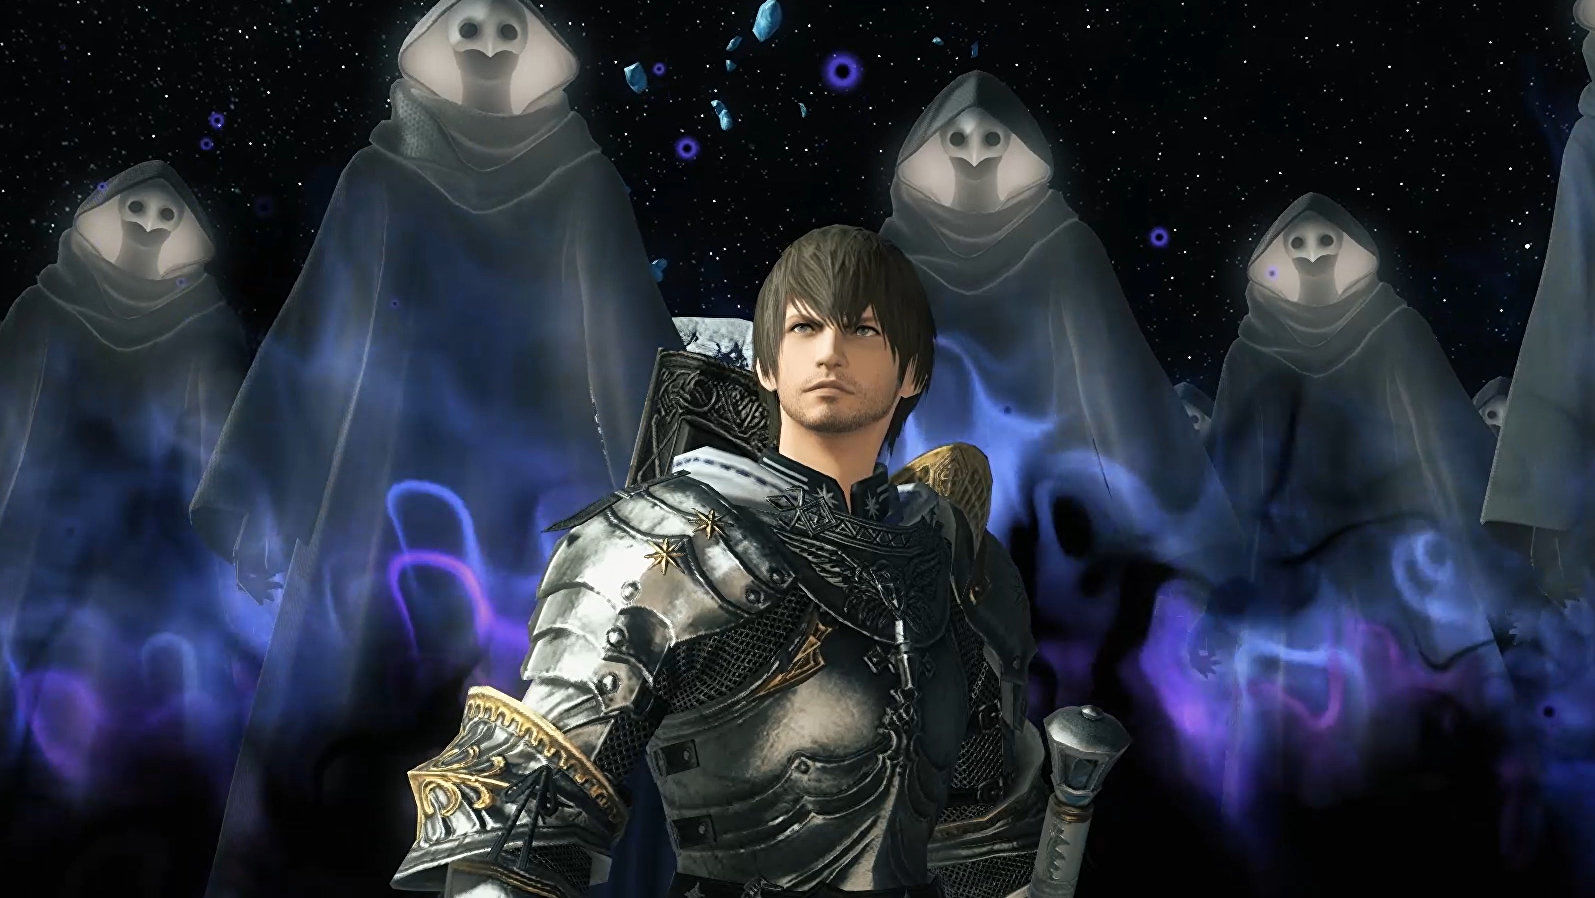 FF14 daily reset time: When is it?